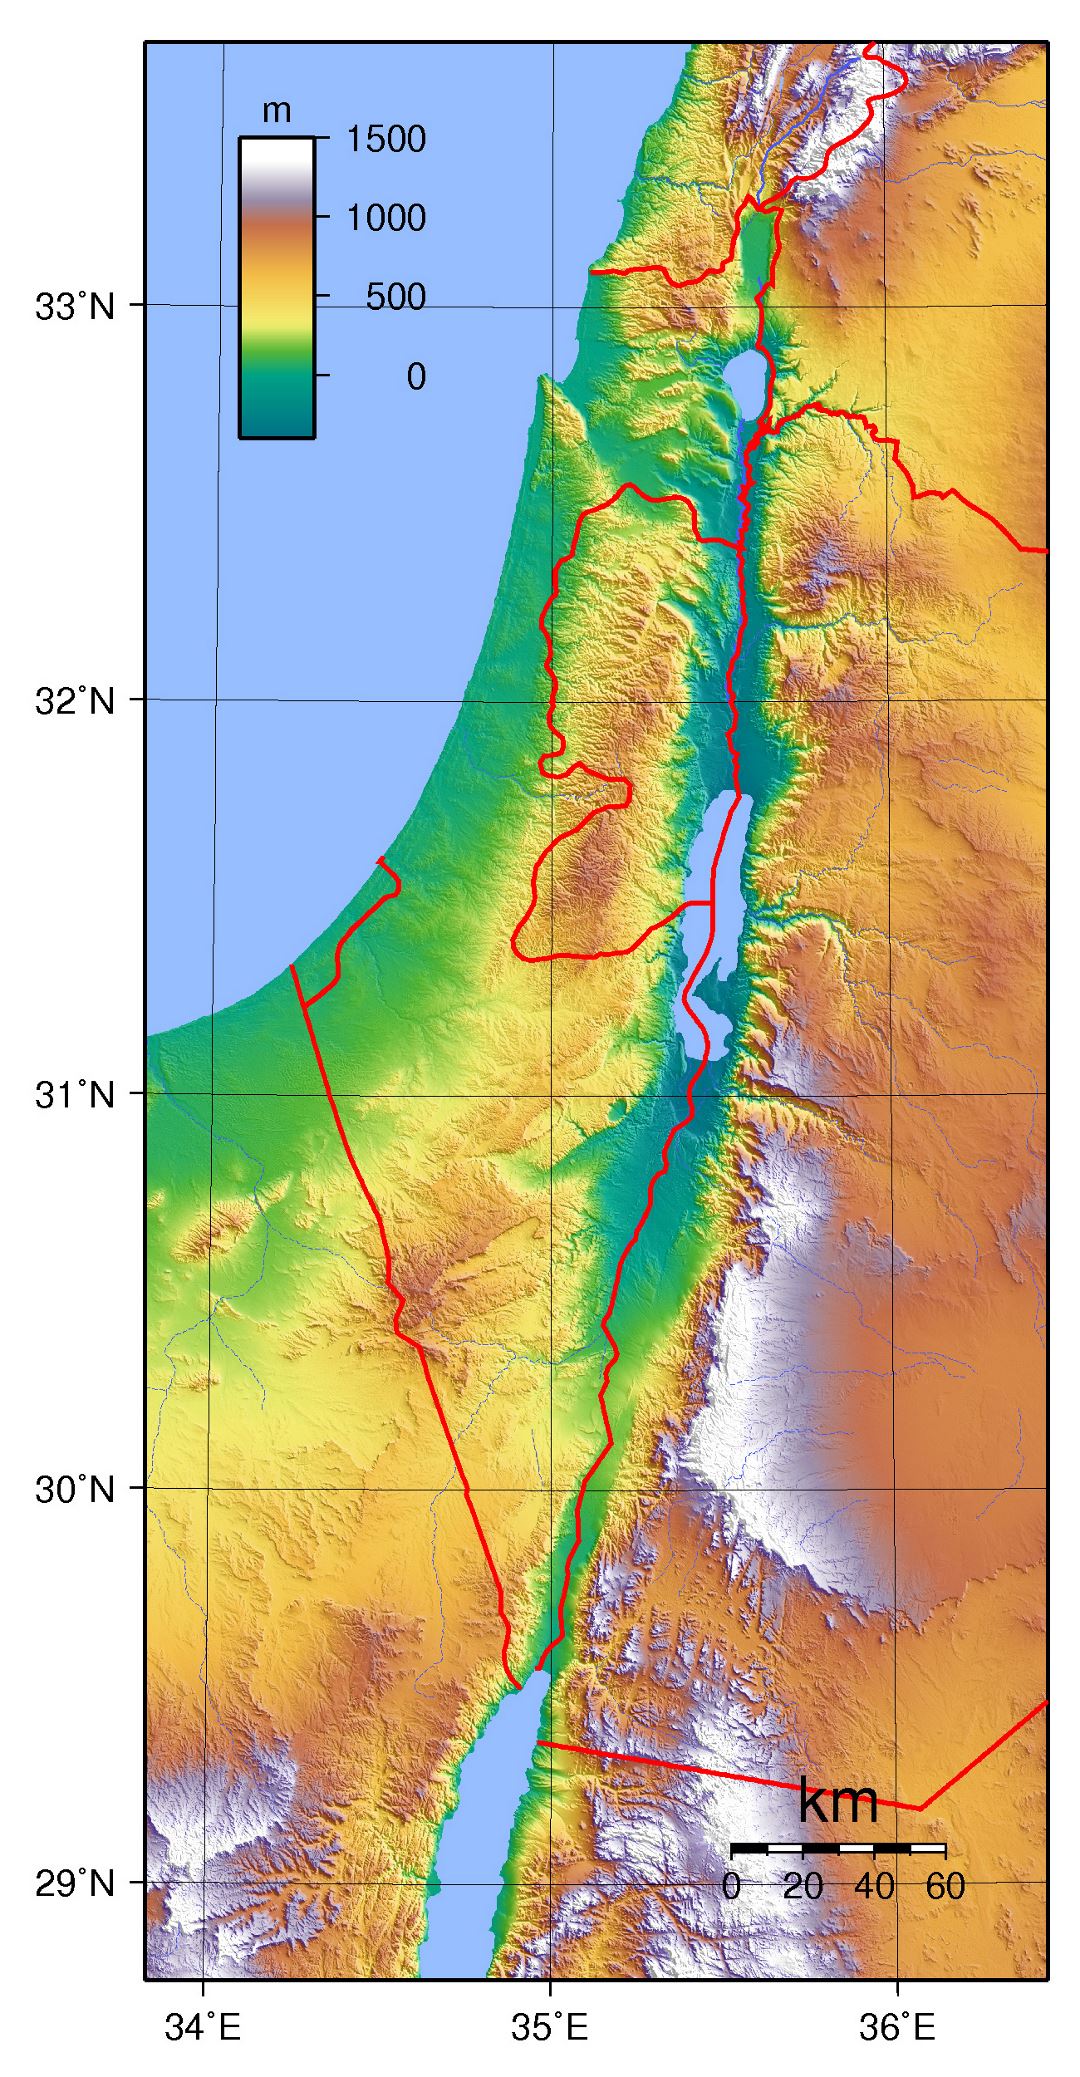 Large topographical map of Israel